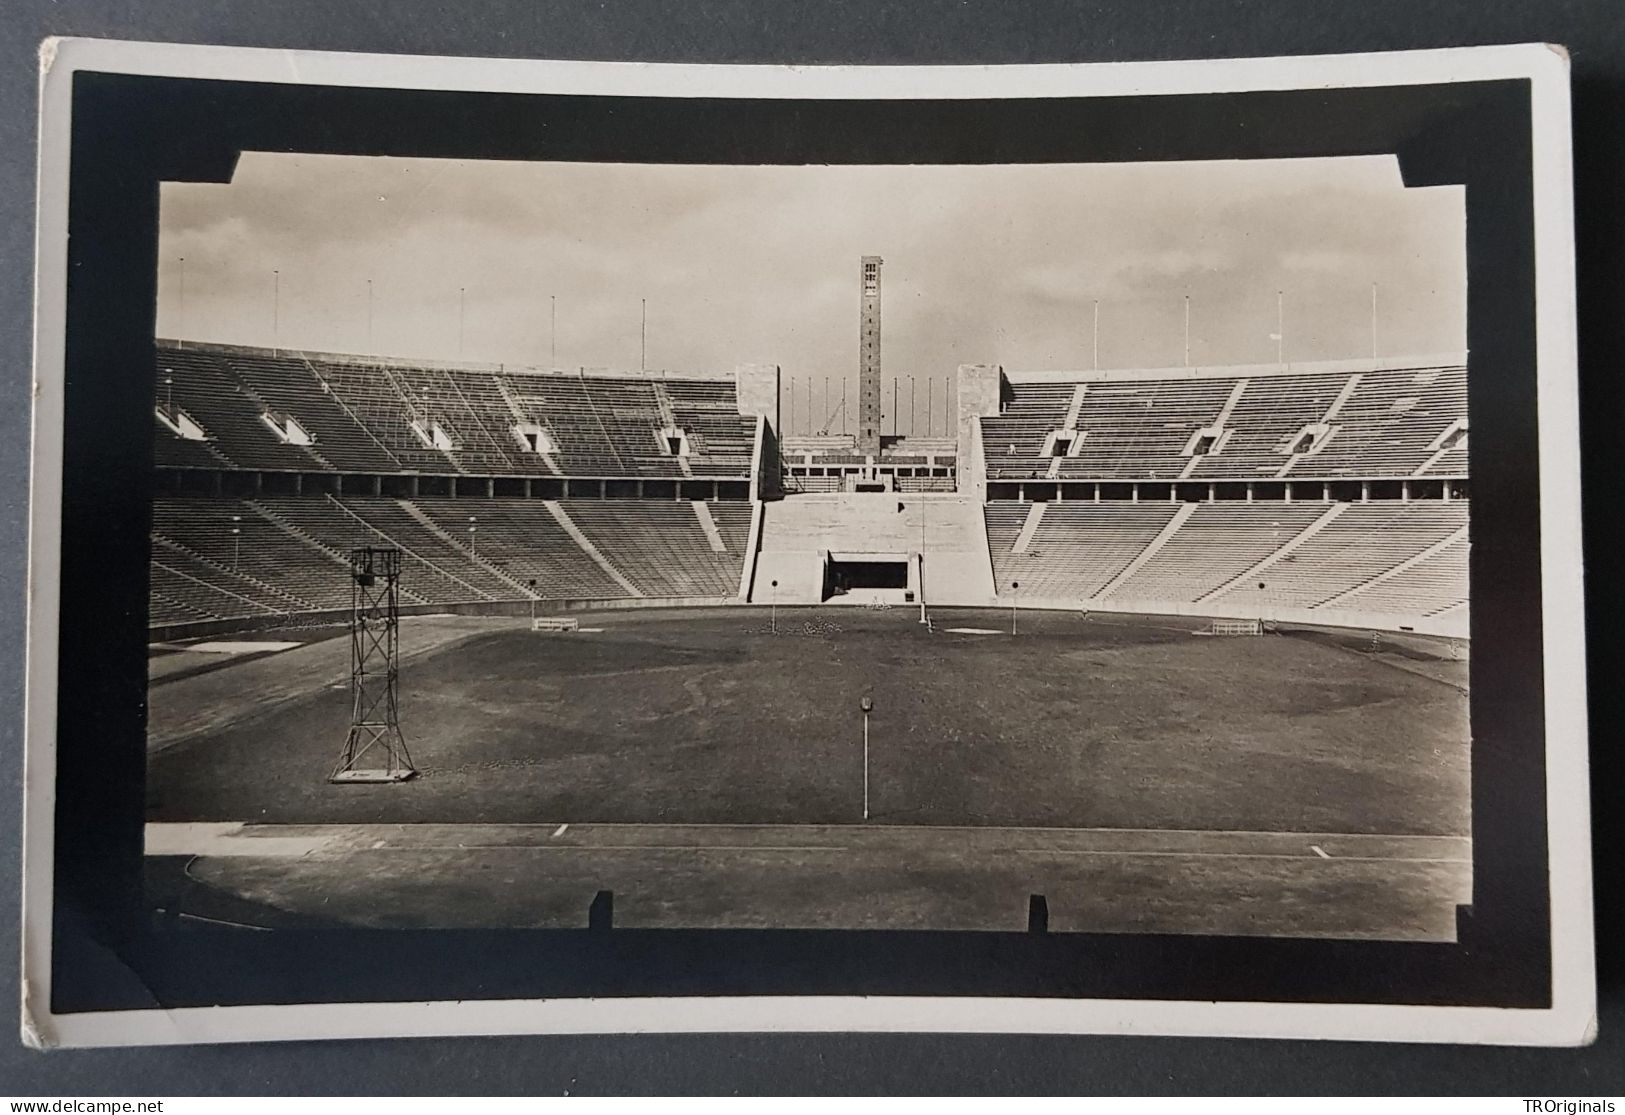 GERMANY THIRD 3rd REICH ORIGINAL POSTCARD BERLIN 1936 SUMMER OLYMPICS STADIUM VIEW - Jeux Olympiques